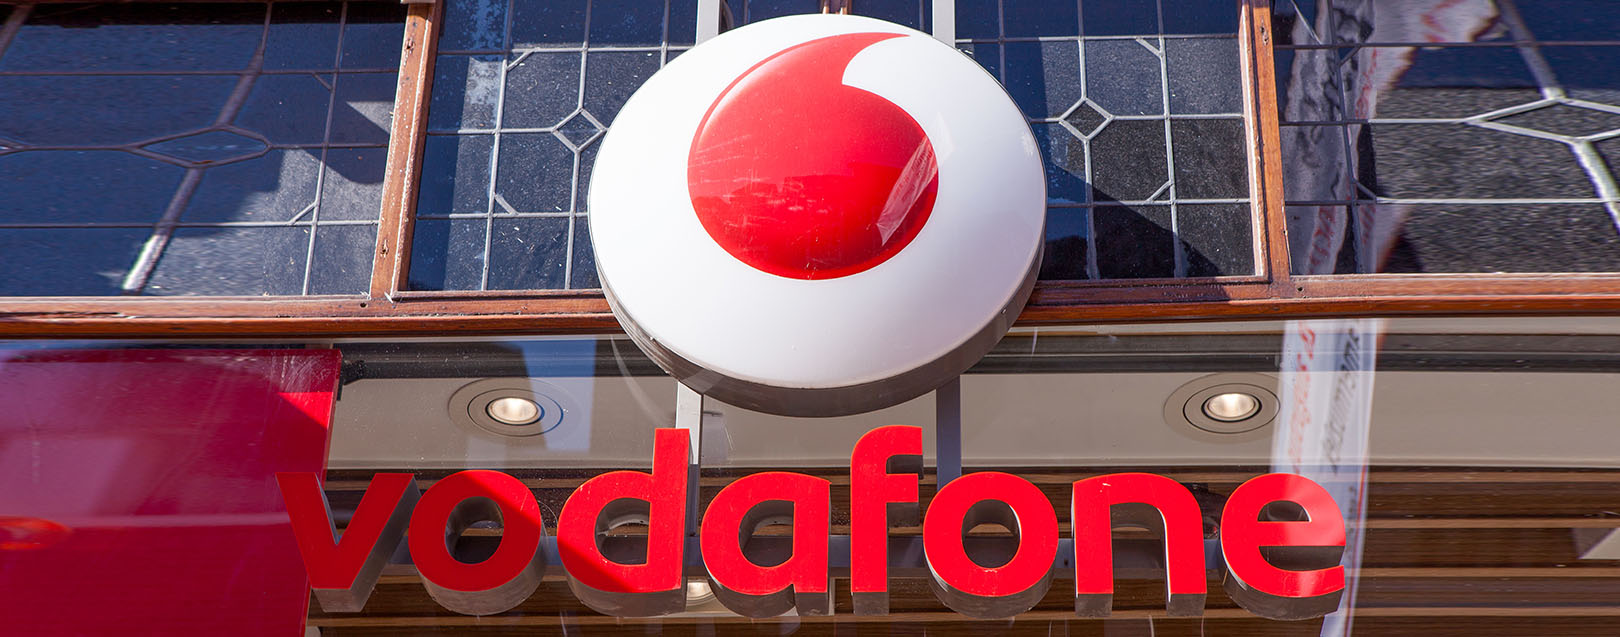 Vodafone, Amazon Prime tie up to offer on-demand entertainment